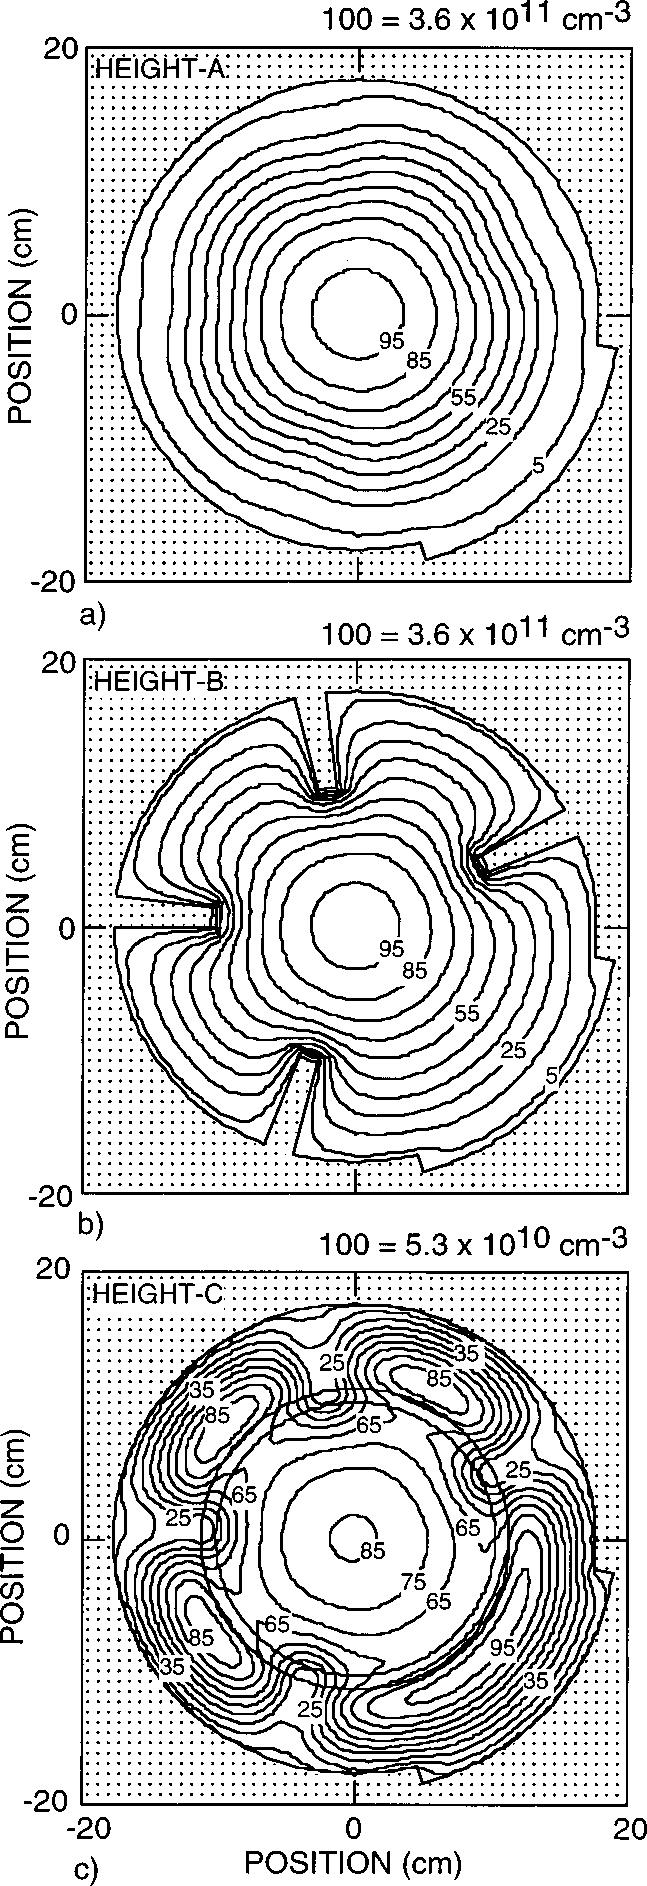 2457 Hwang, Keiter, and Kushner: 3D physical and electromagnetic structures 2457 FIG. 4.